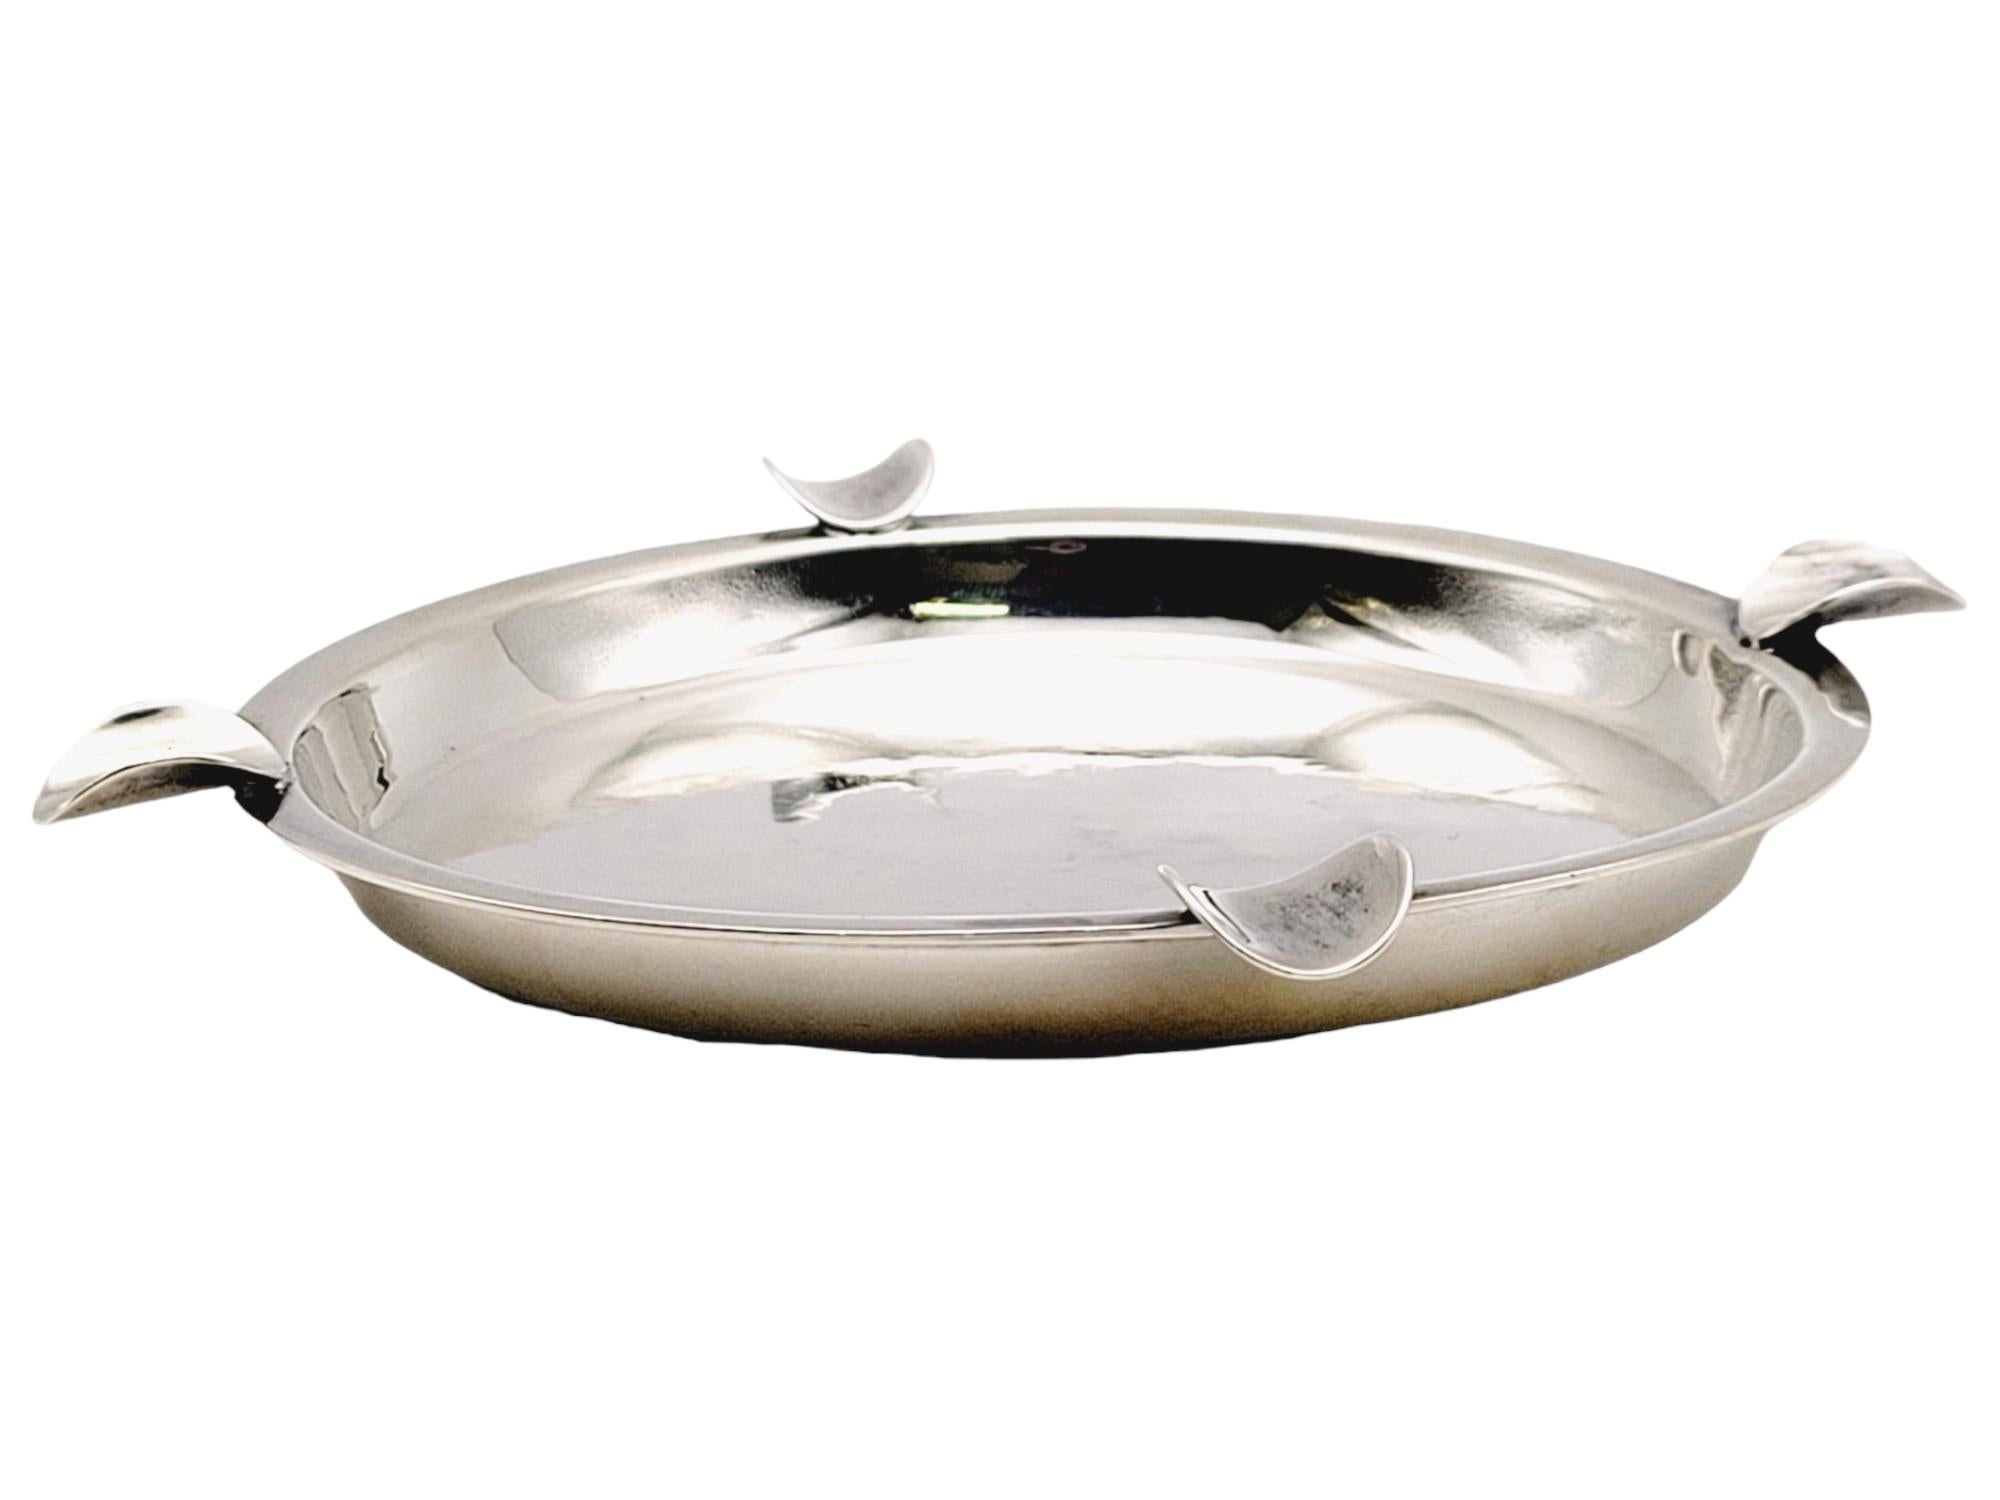 Carl Poul Petersen Polished Modern Ashtray in Sterling Silver, circa 1940-1970 For Sale 3